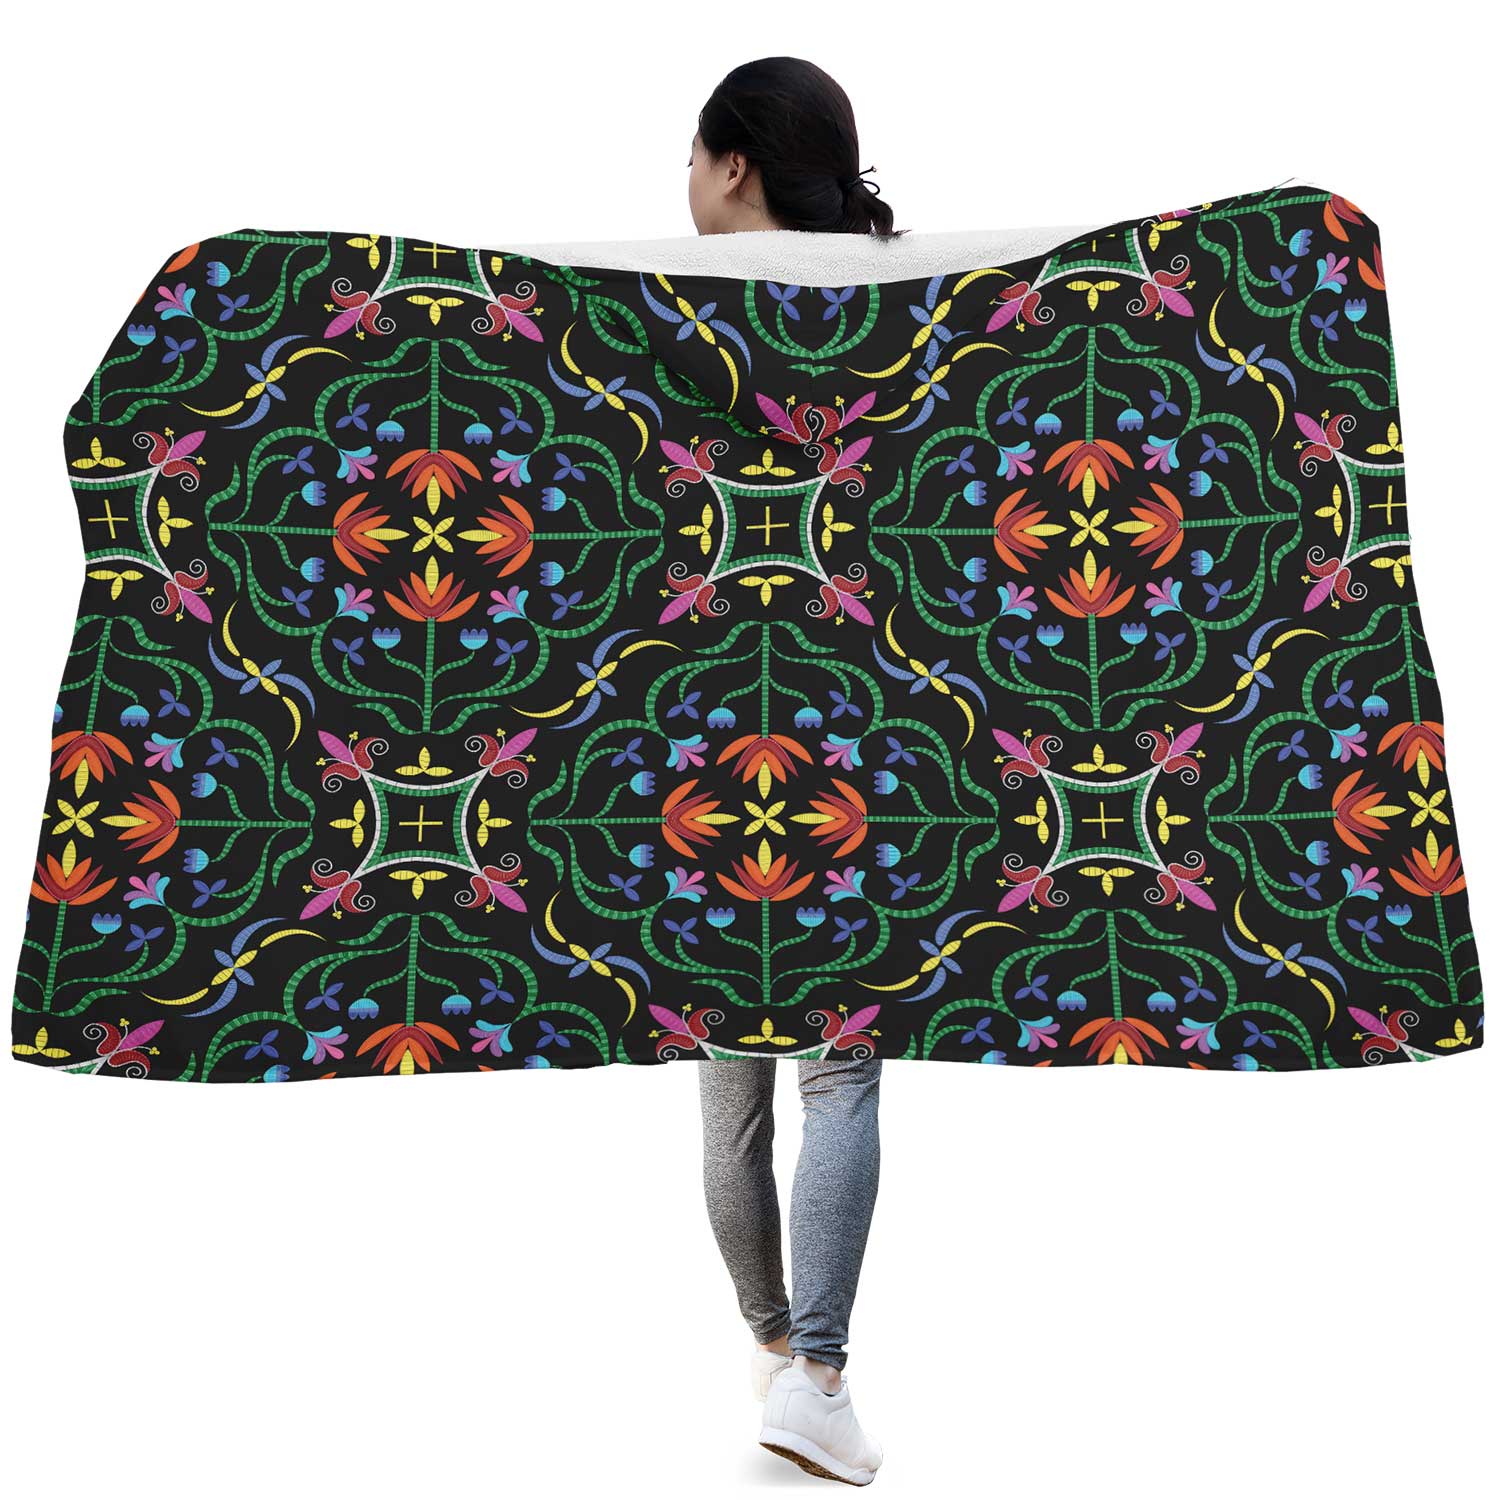 Quill Visions Hooded Blanket